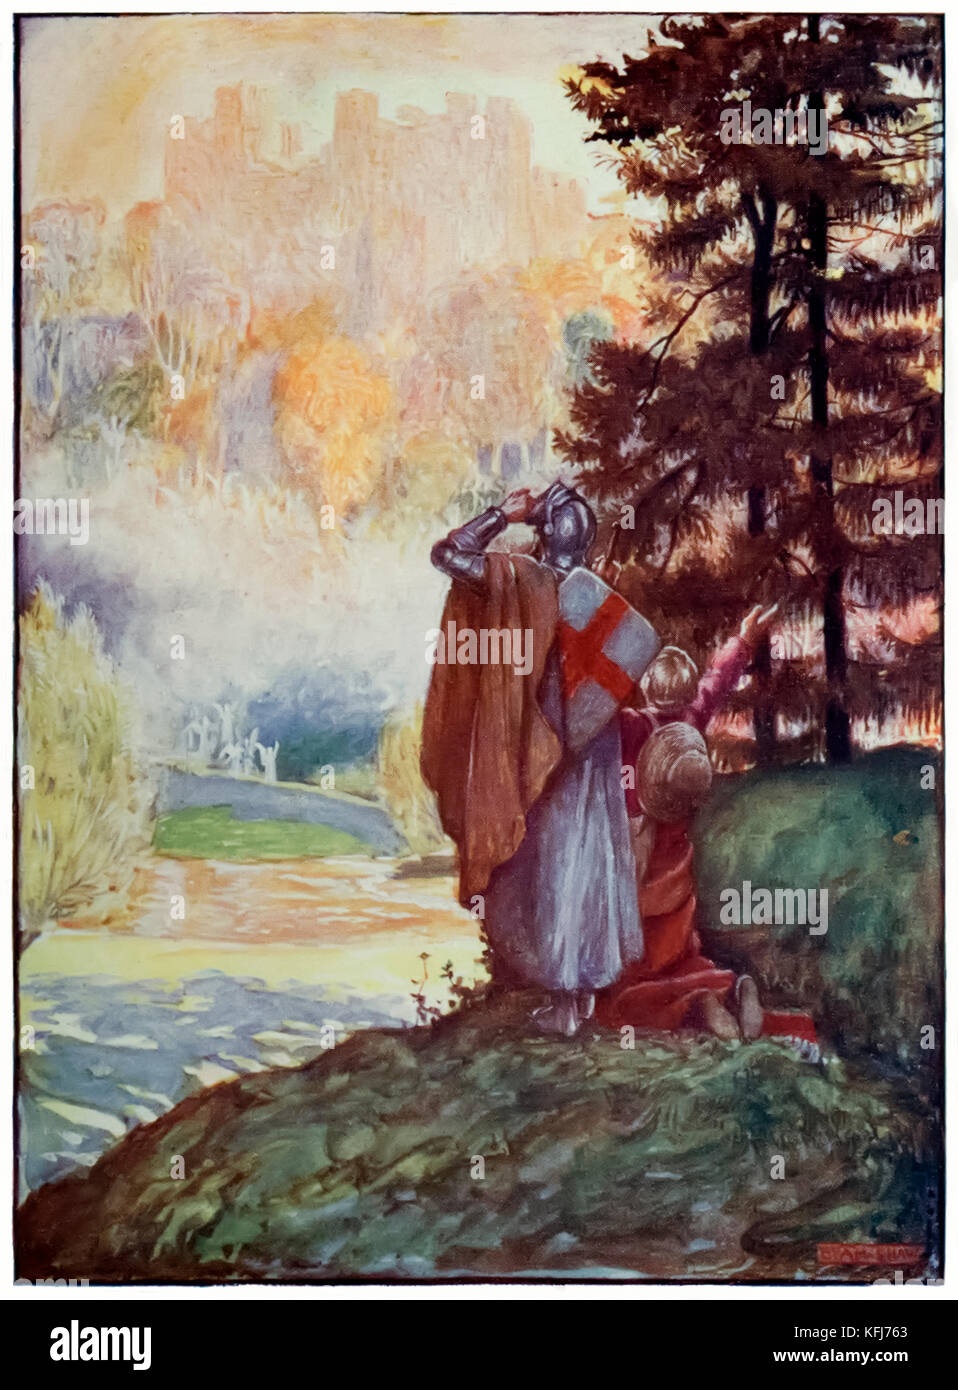 “Christian and Hopeful come in sight of the Celestial City” from ‘The Pilgrim’s Progress From This World, To That Which Is To Come’ by John Bunyan (1628-1688). Illustration by Byam Shaw (1872-1919). See more information below. Stock Photo